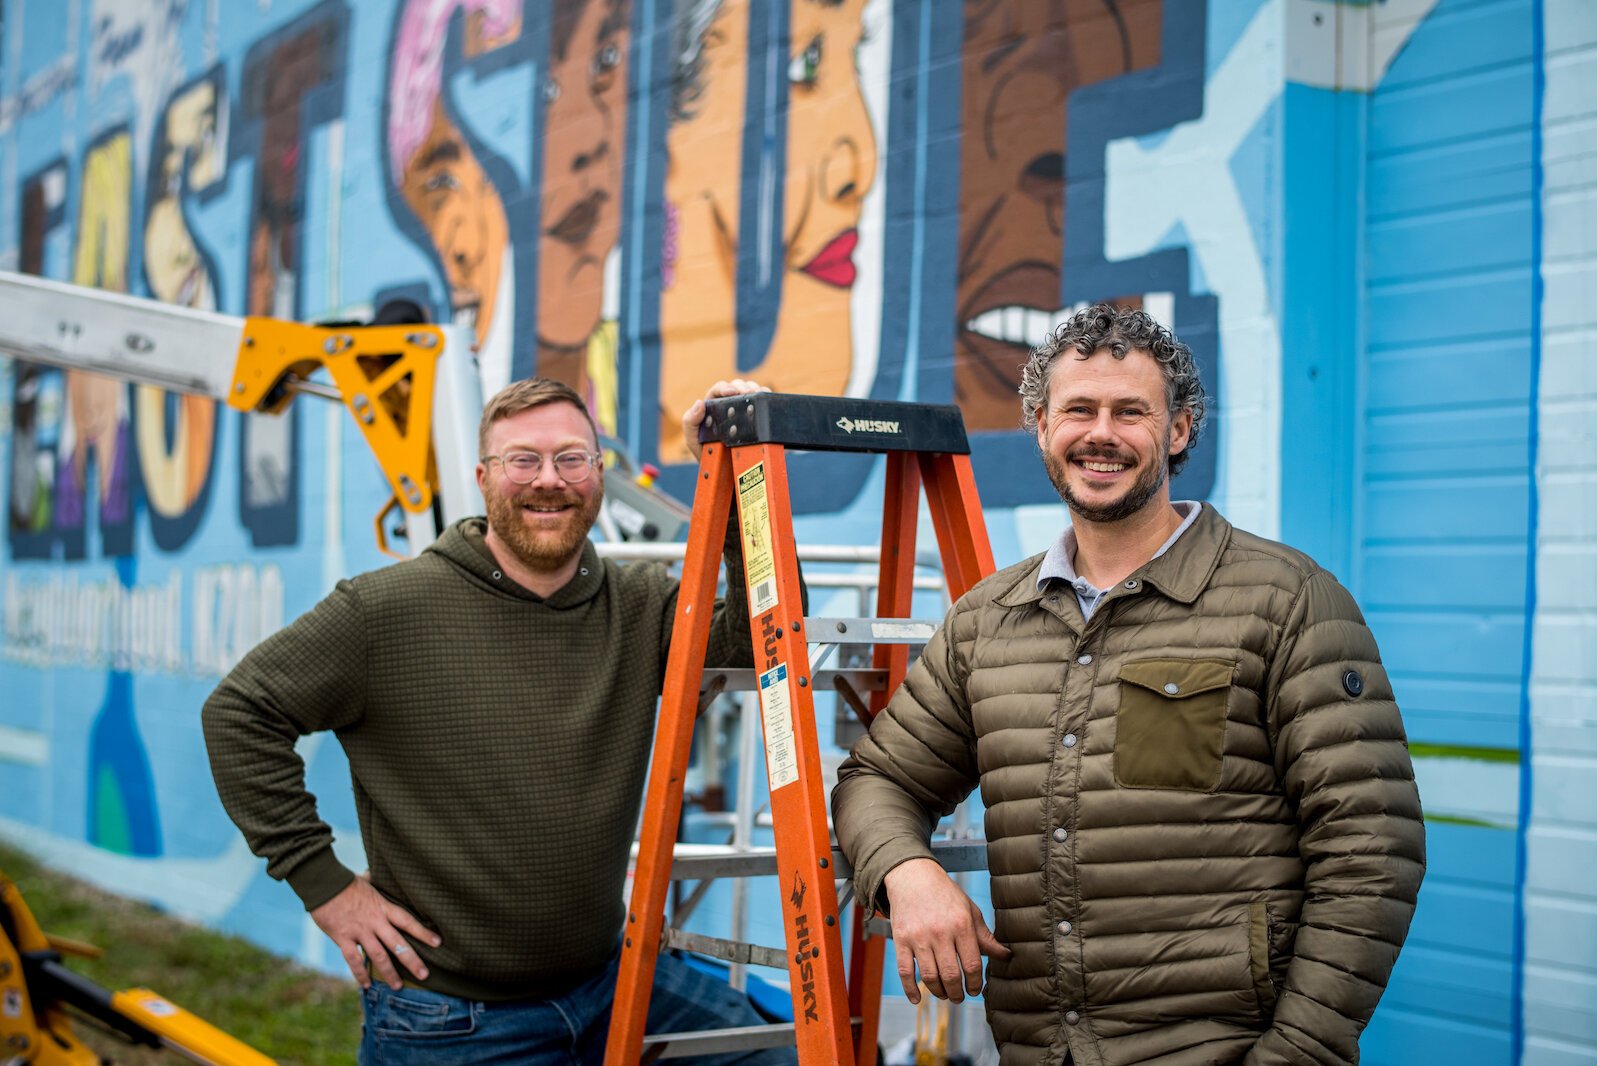 Patrick Hershberger and Chad Burke have taken on the long-term project of renovating an old detailing shop for their respective businesses.